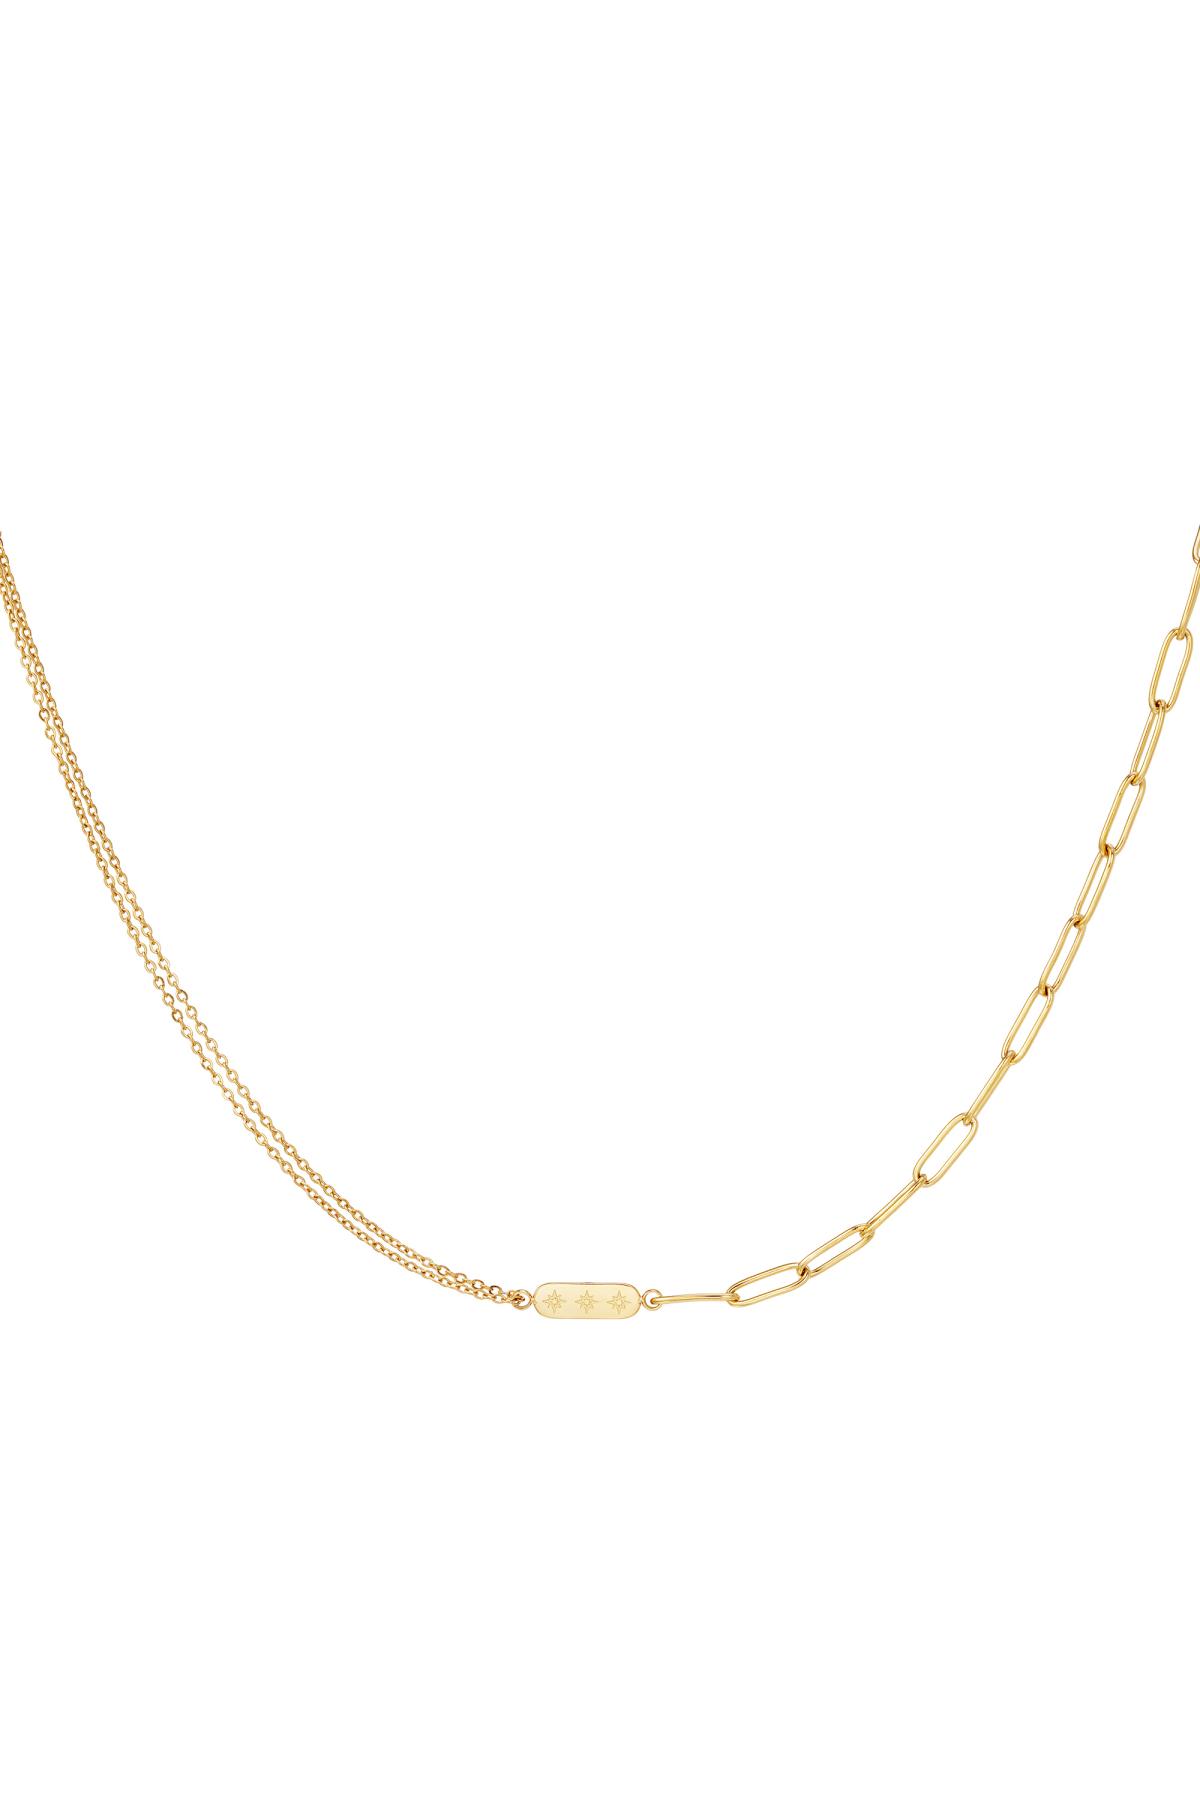 Stainless Steel Necklace with Double Chain and Charm Gold